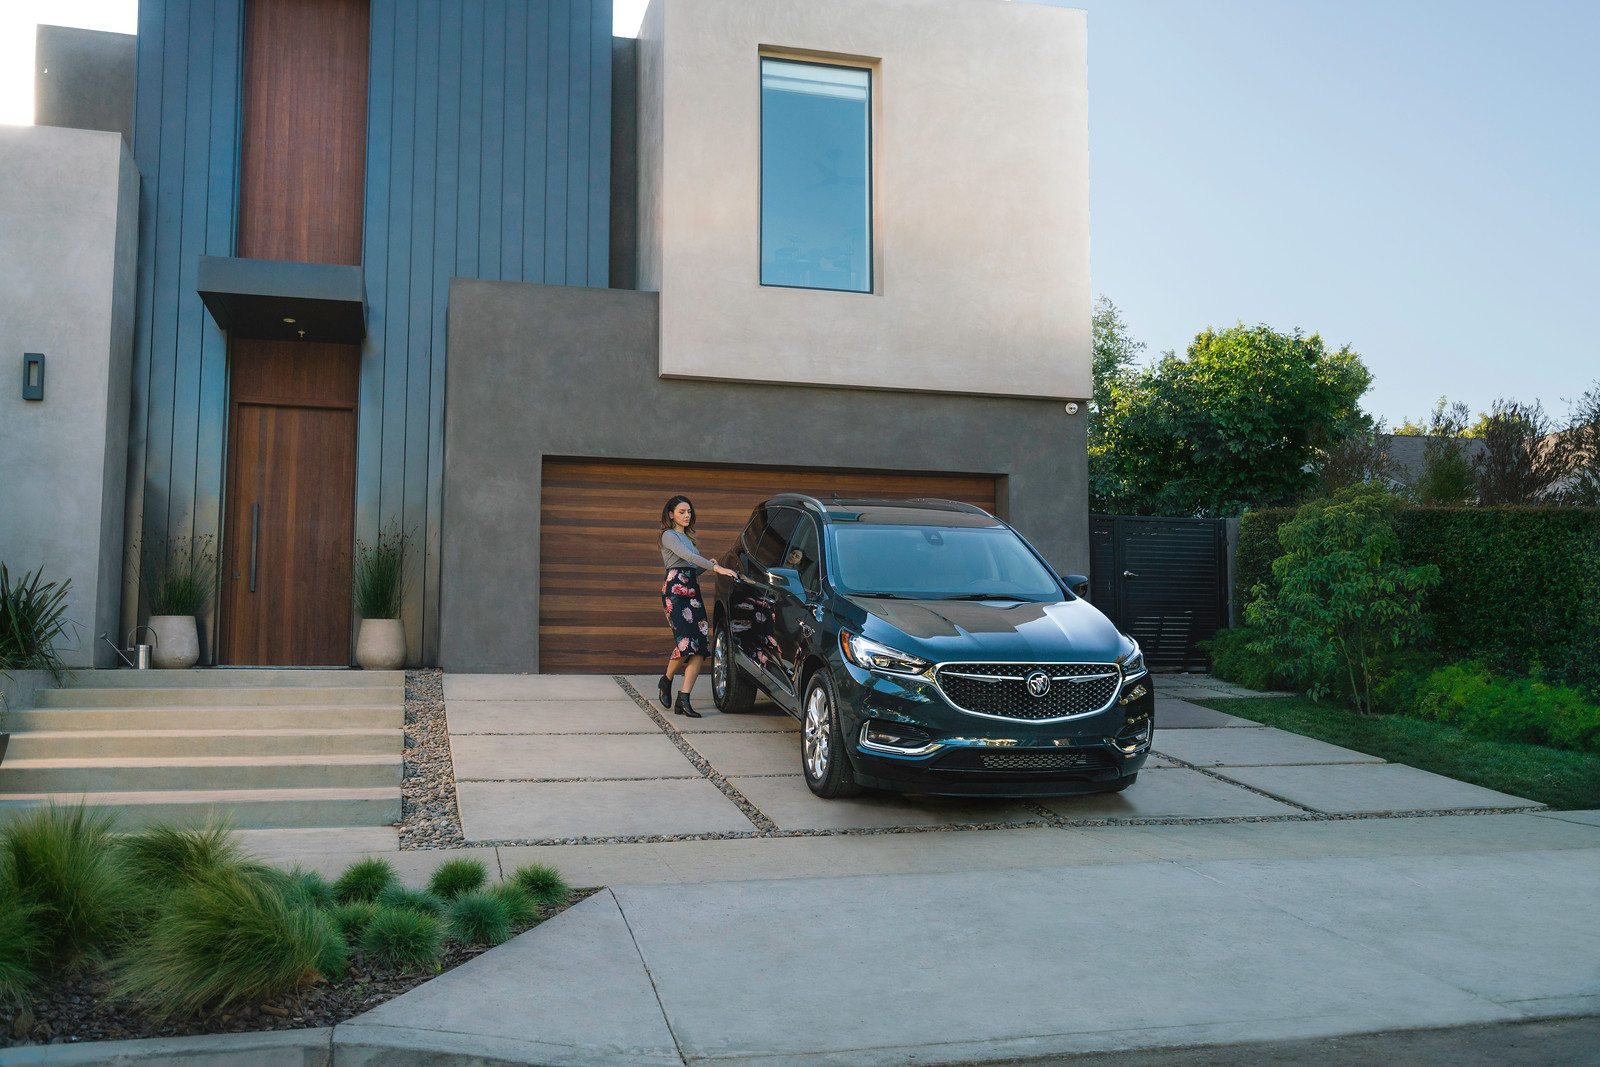 Buick Enclave commercial Lifestyle Photography